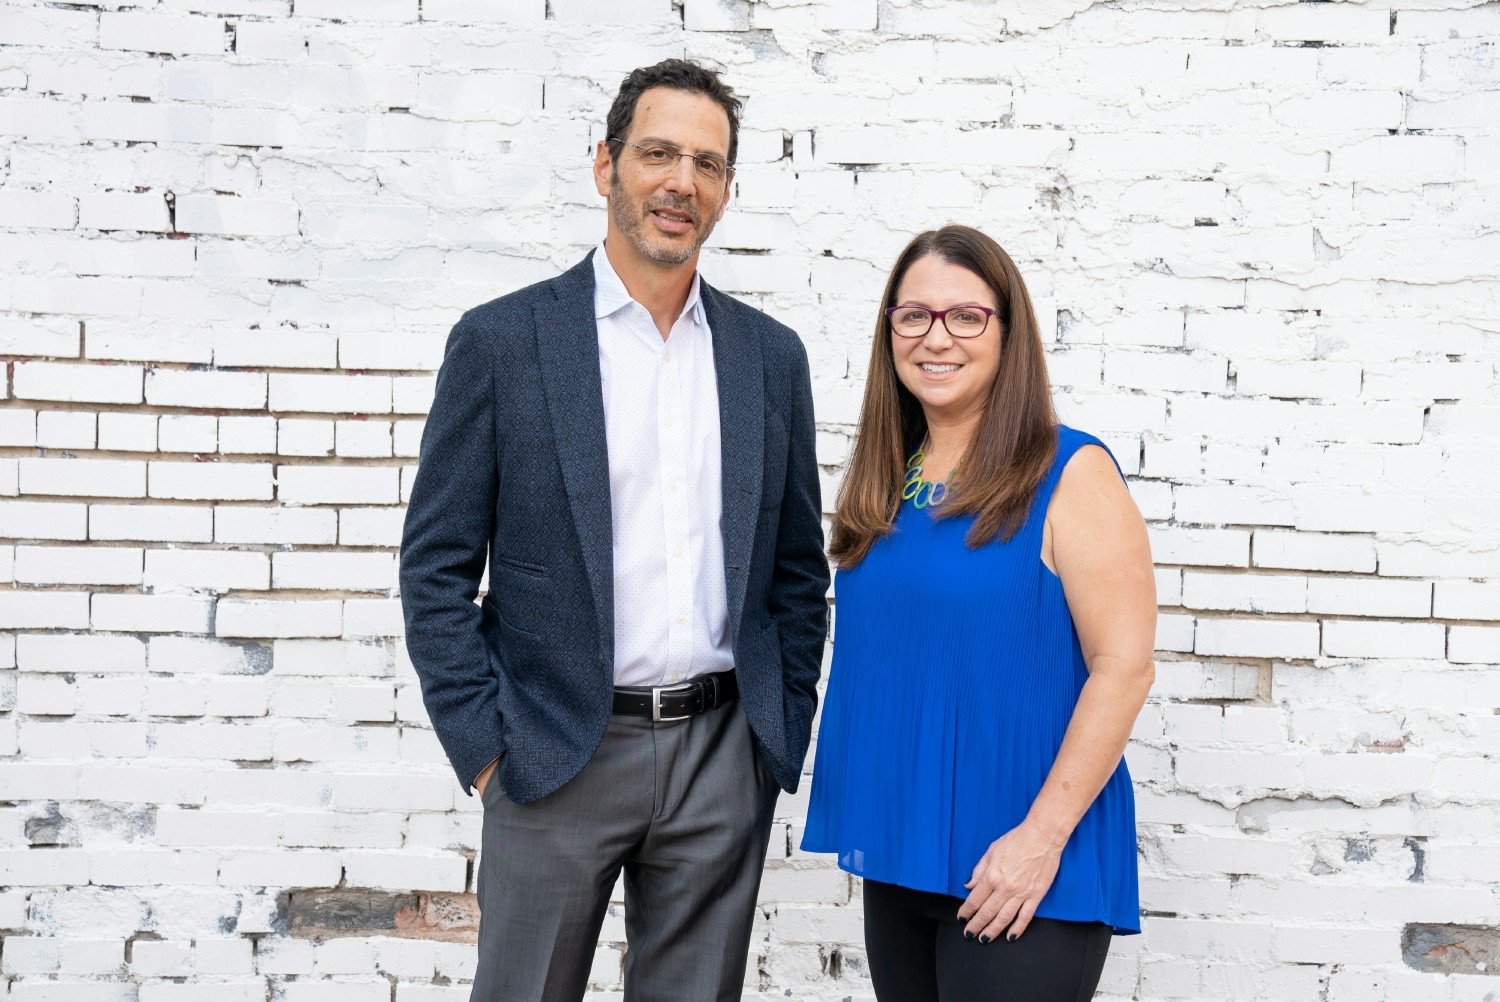 Julie Williamson and Bruce Siegel are equal owners of Karrikins Group. Their partnership sets the tone and vision.  